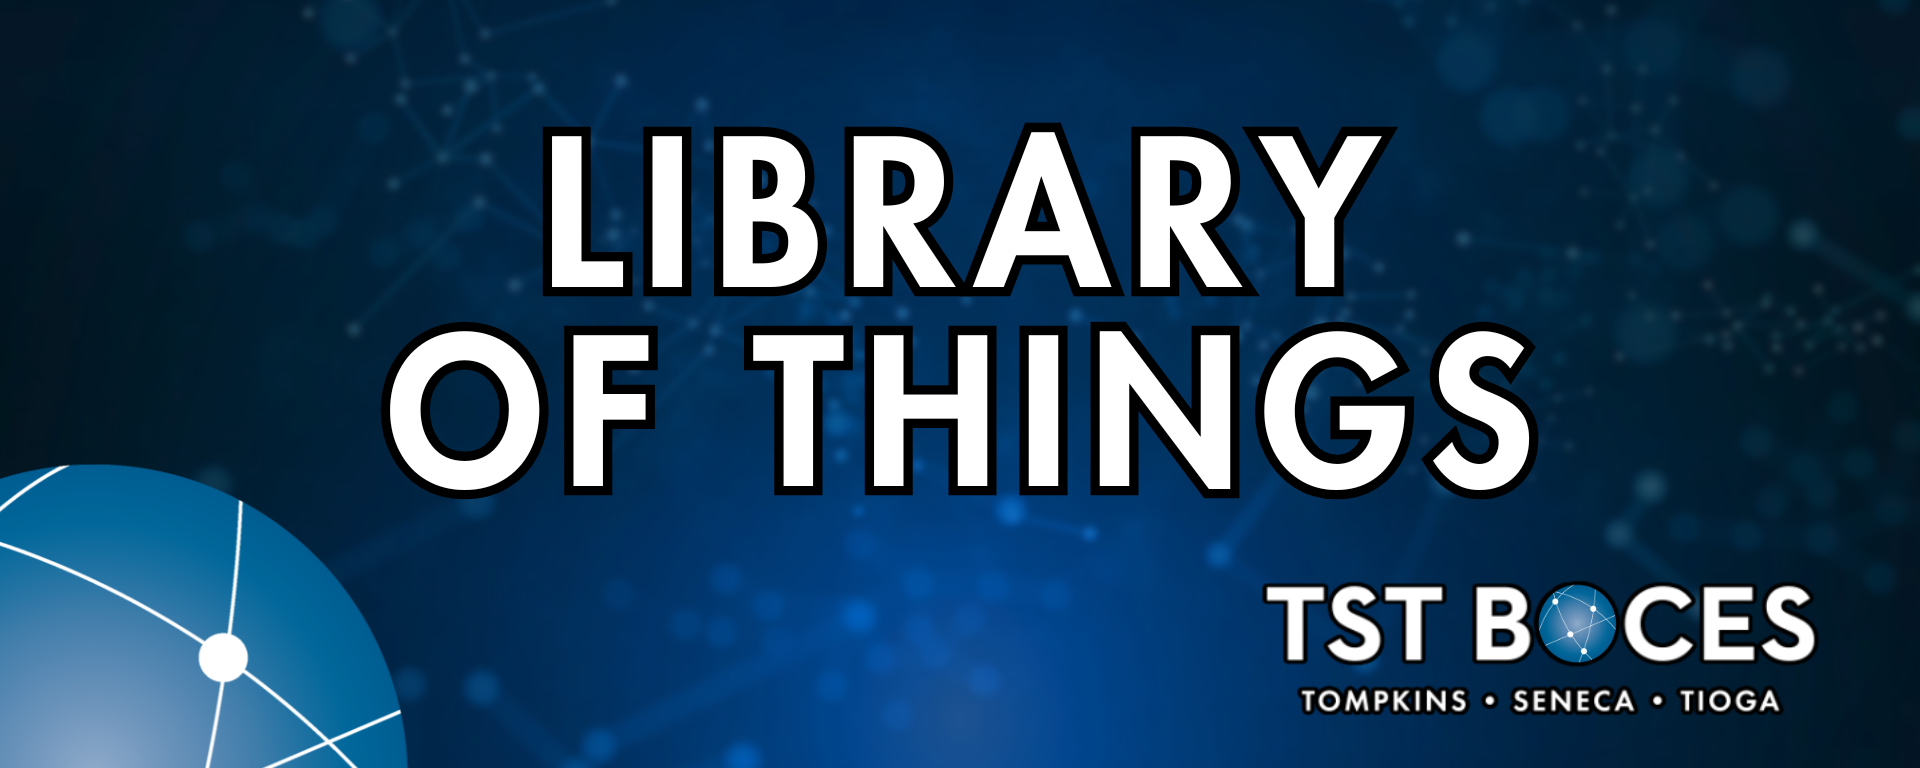 Library of things banner